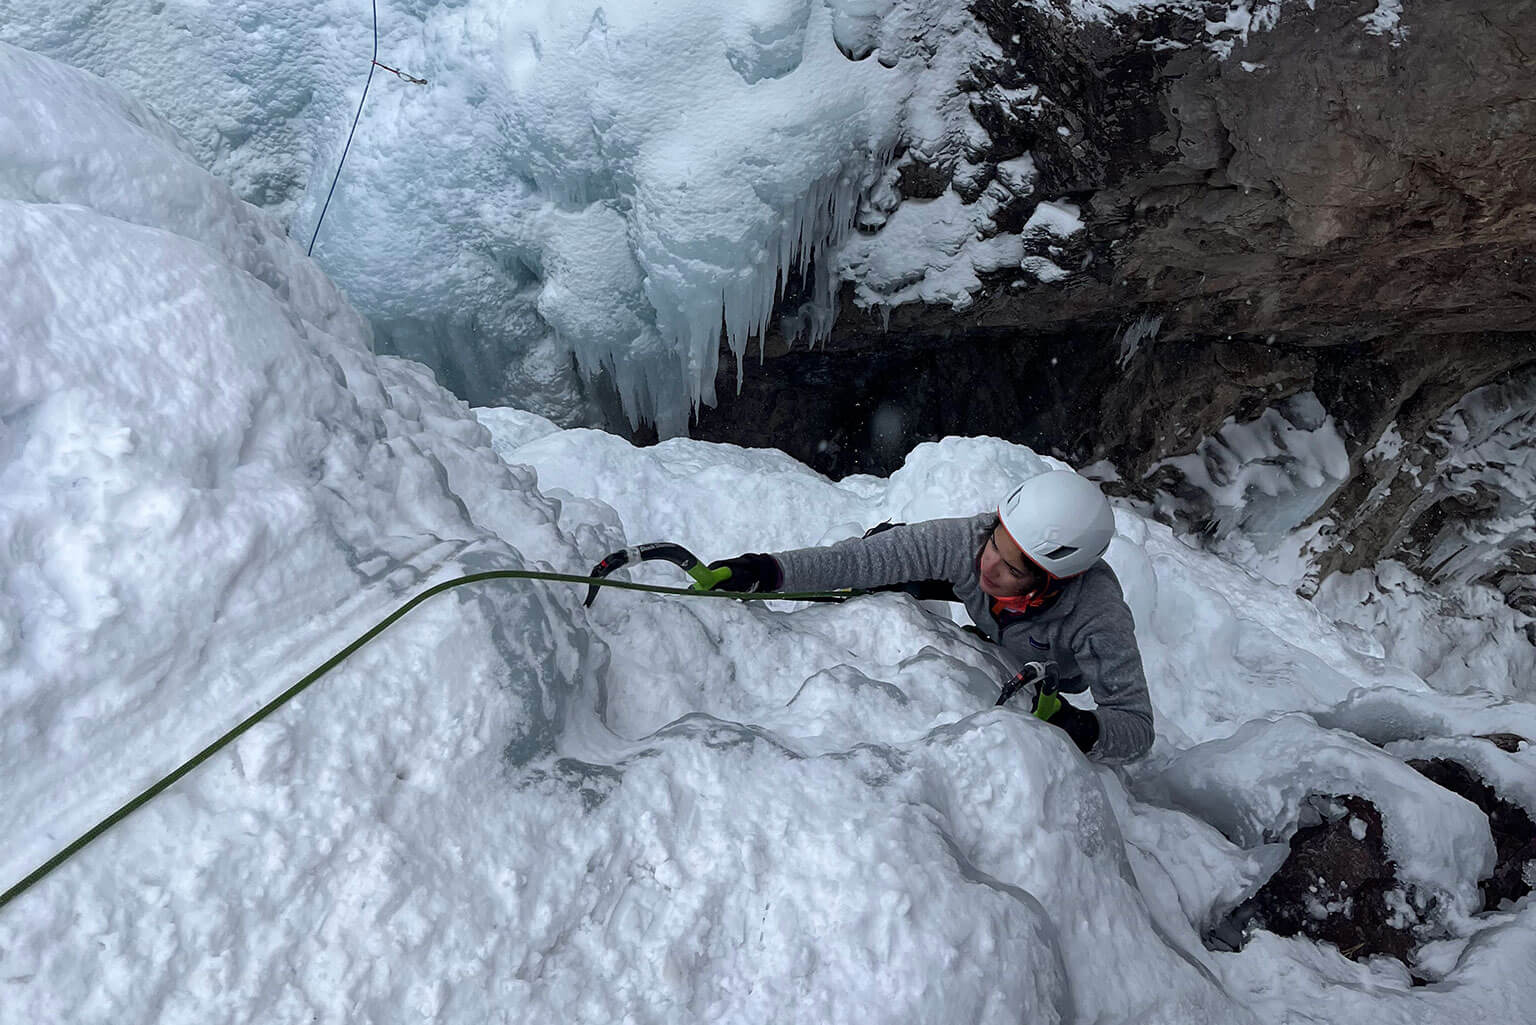 U.S. Air Force Cadet 1st Class Maya Mandyam climbs Ice Falls during a visit to Ouray, Colorado.